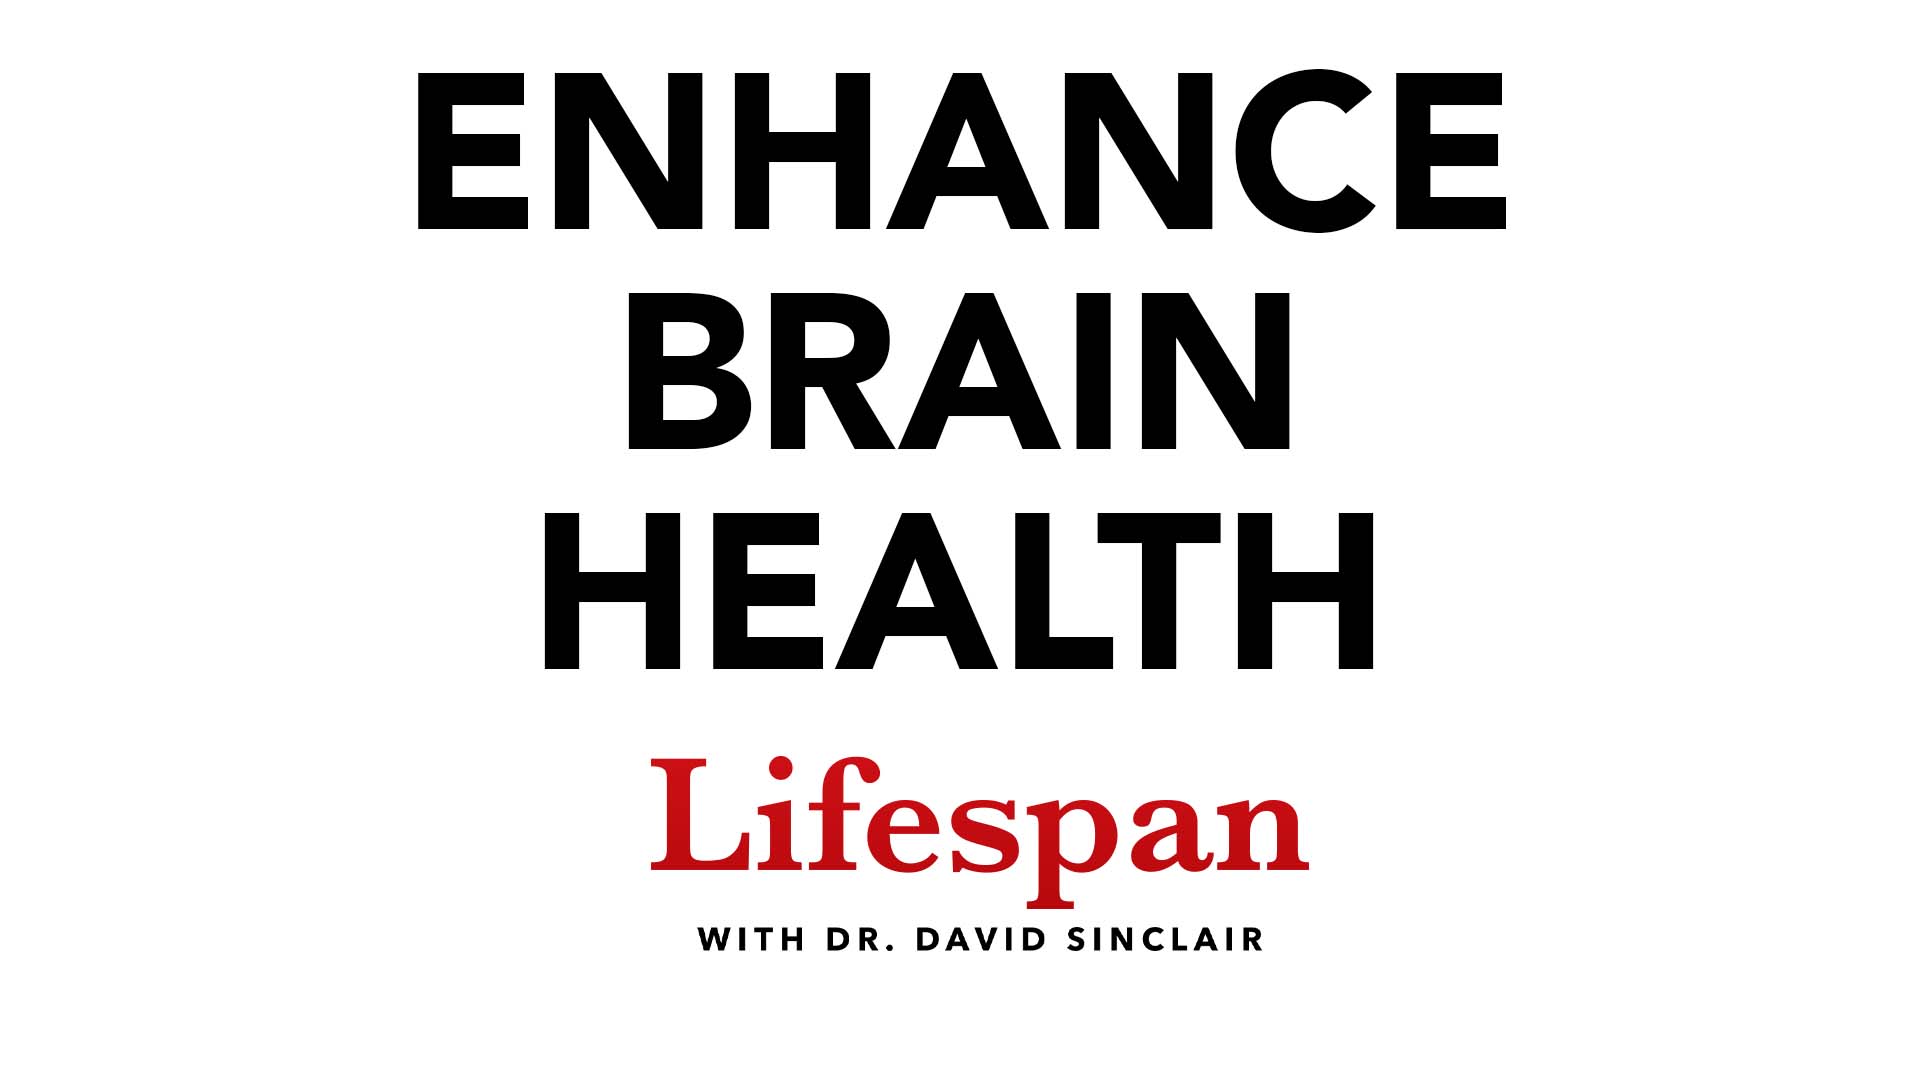 The Science of Keeping the Brain Healthy